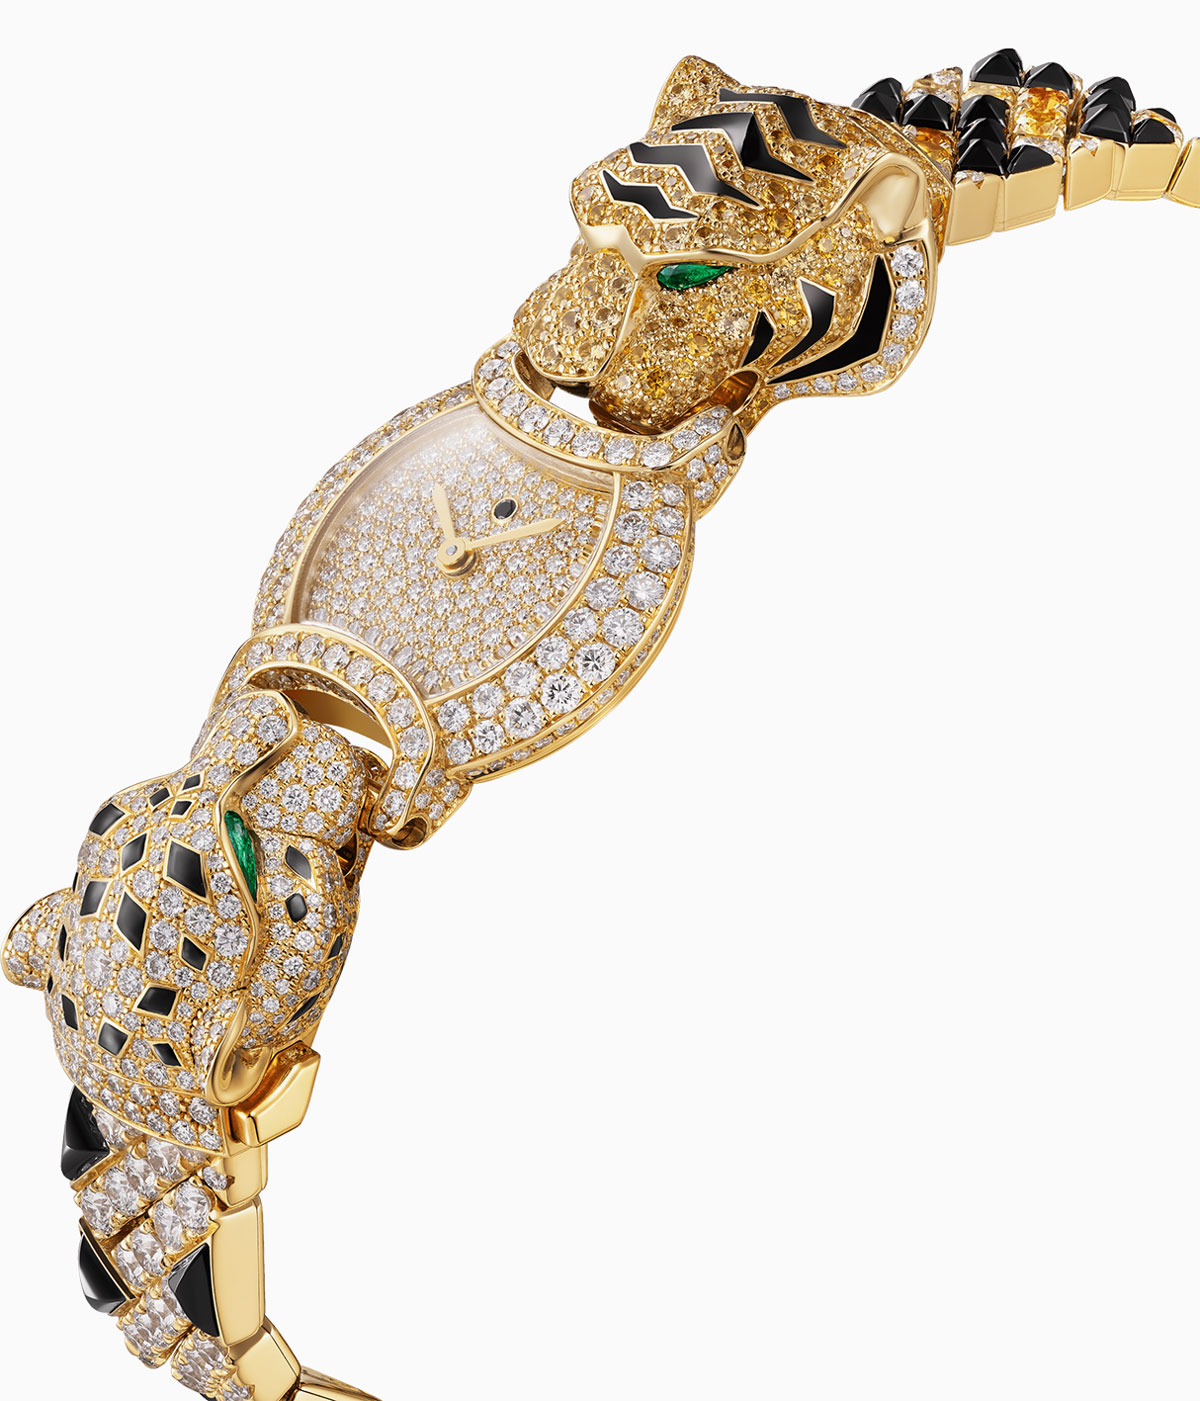 One of Les Indomptables de Cartier gold animal Cartier high jewellery watches